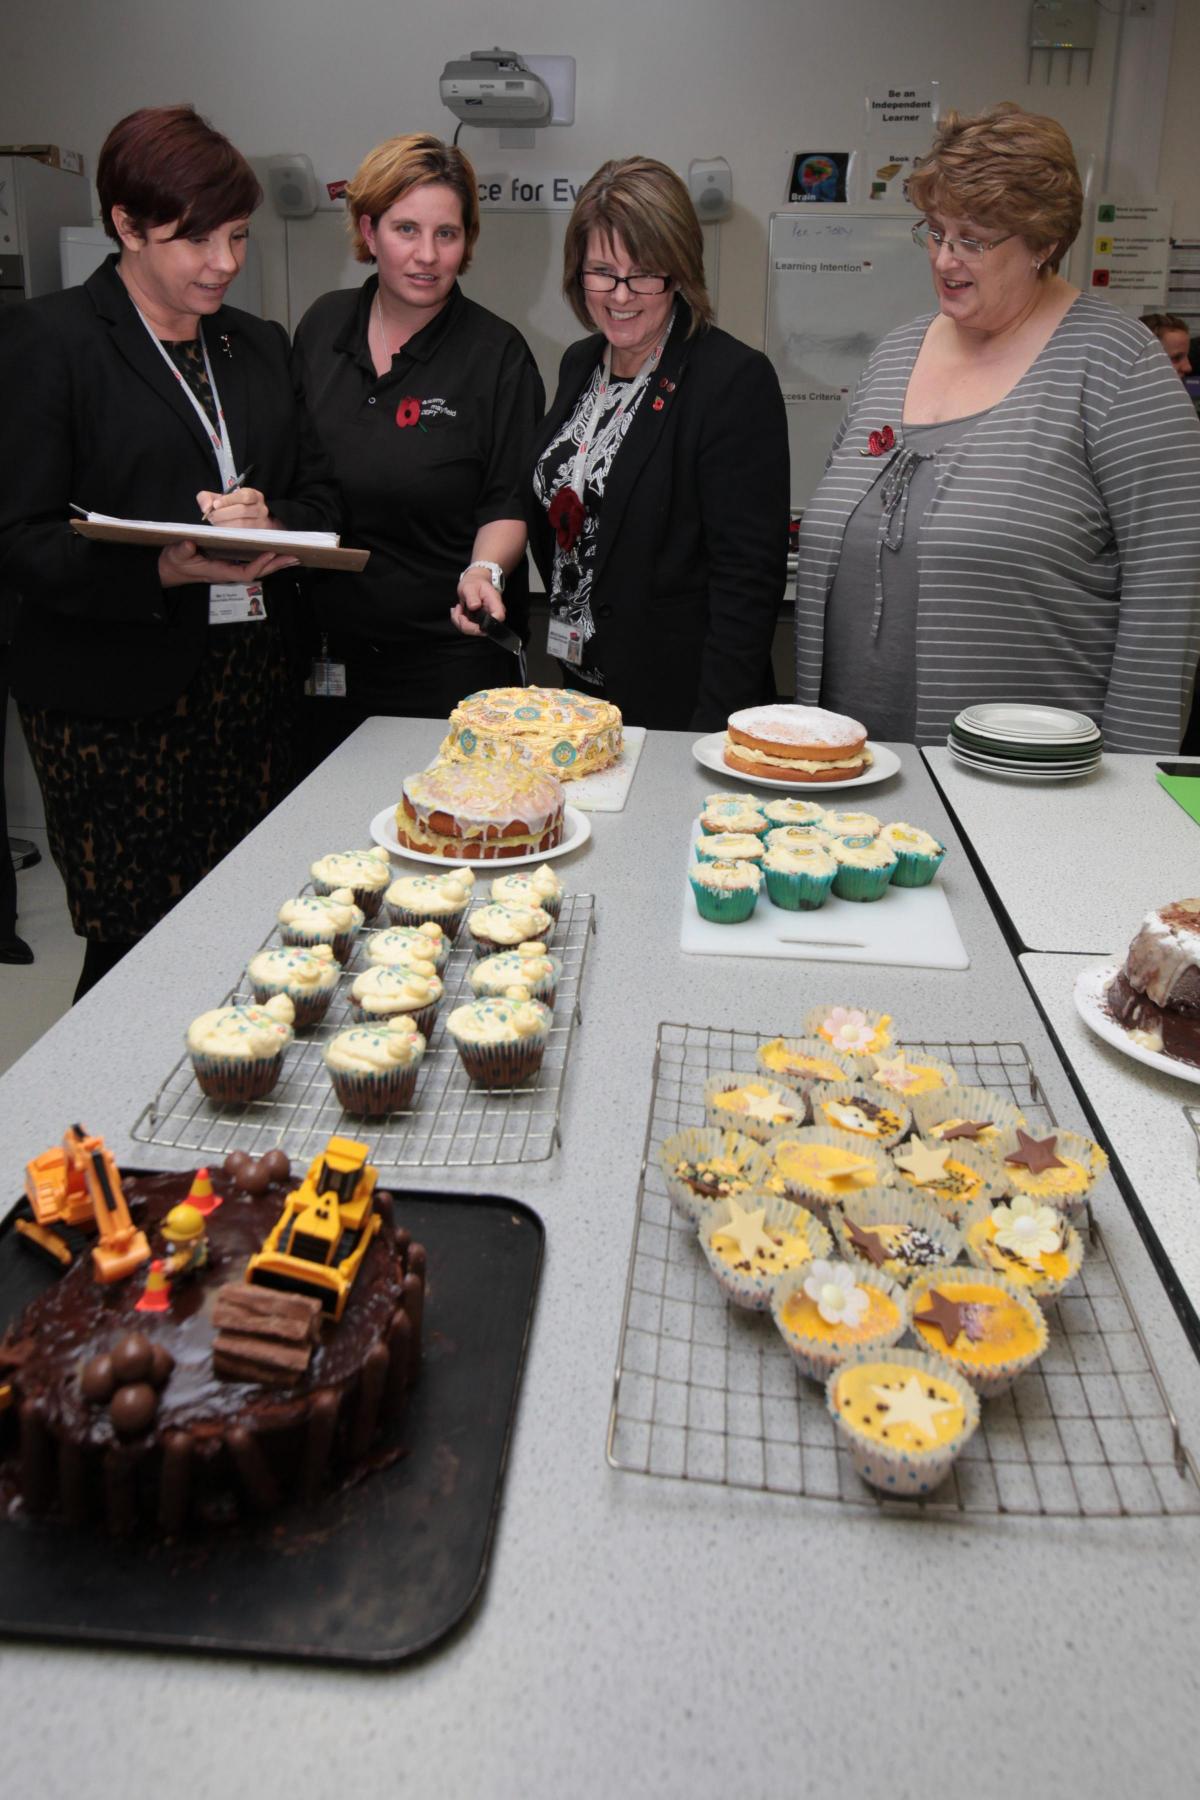 Children in Need 2014 - Bake Off at Oasis Academy